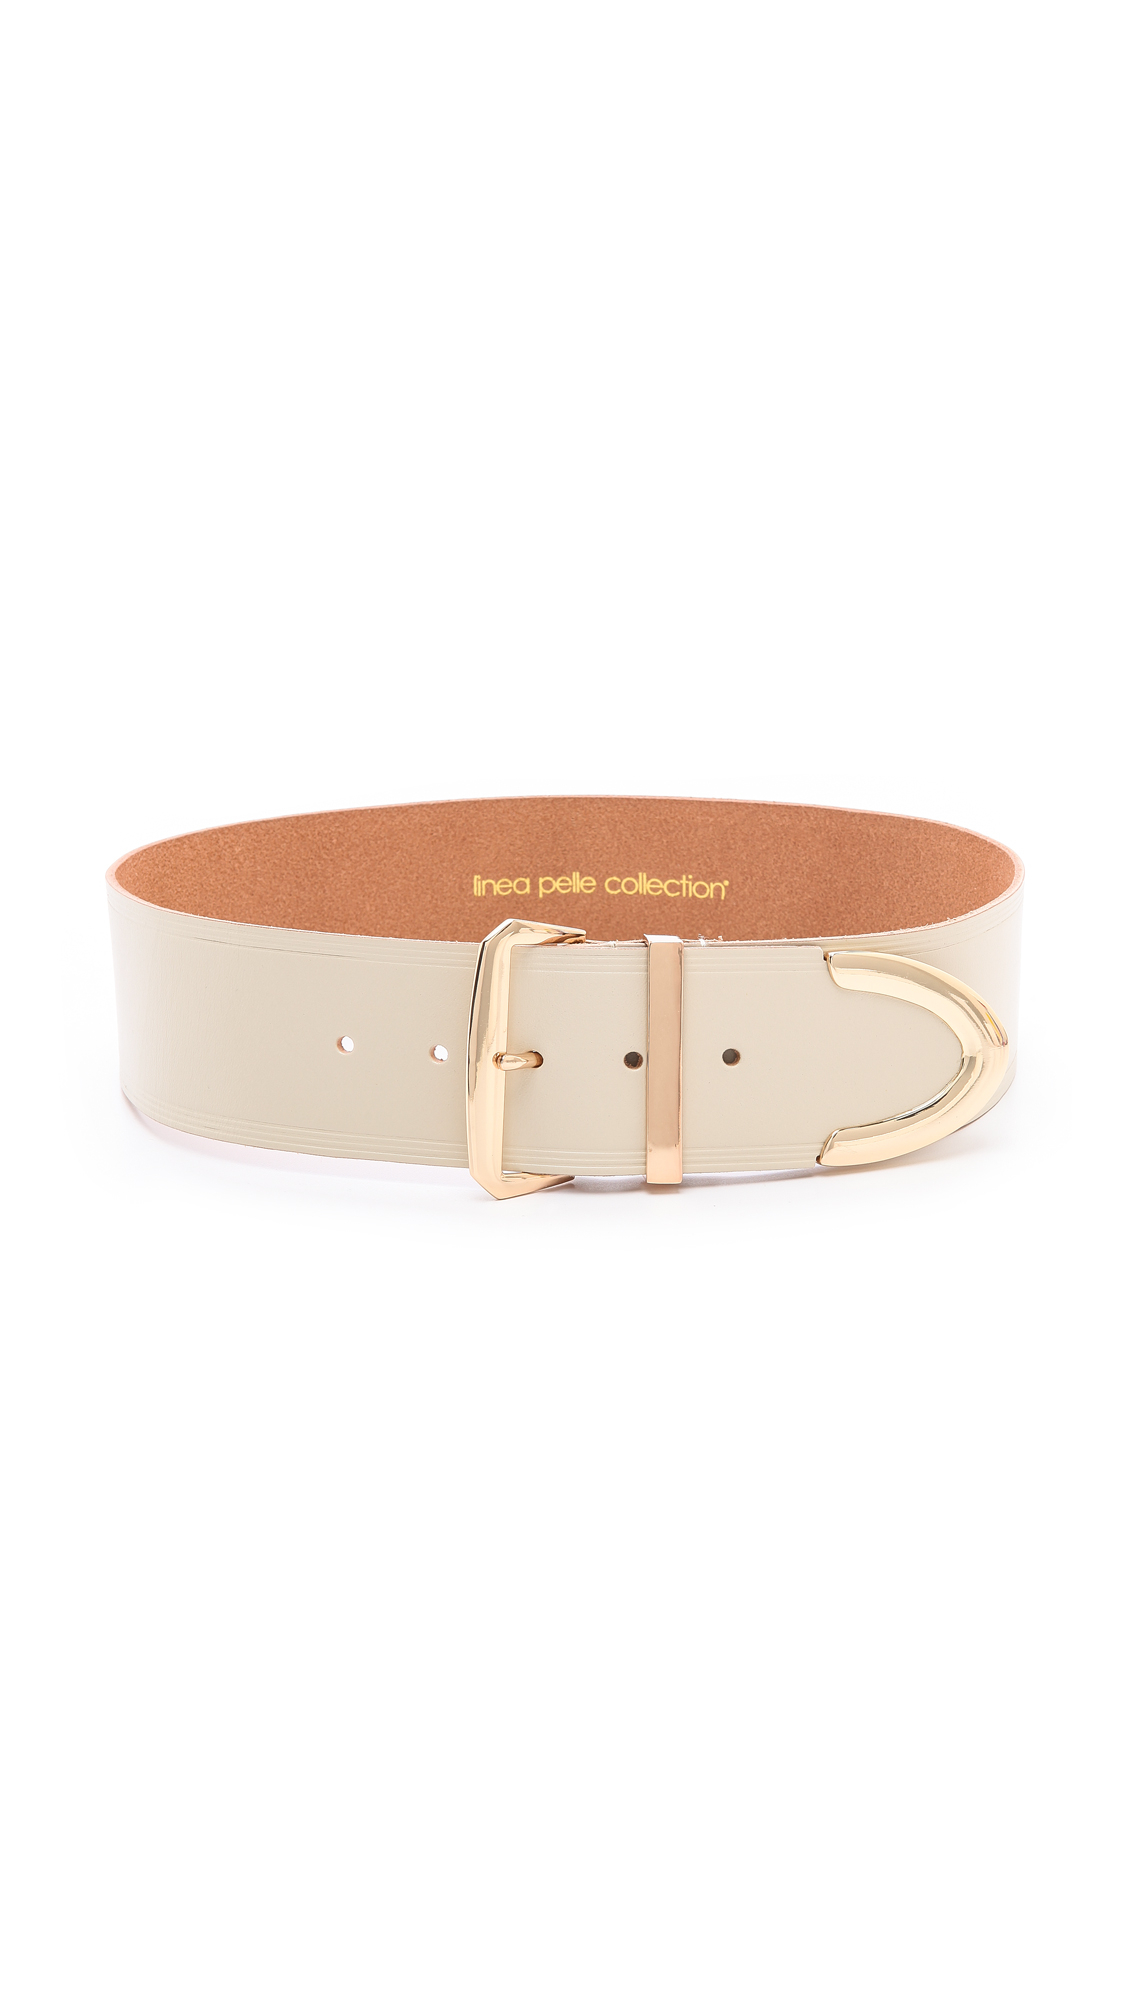 Lyst - Linea pelle Thick Metal Tip Belt in White